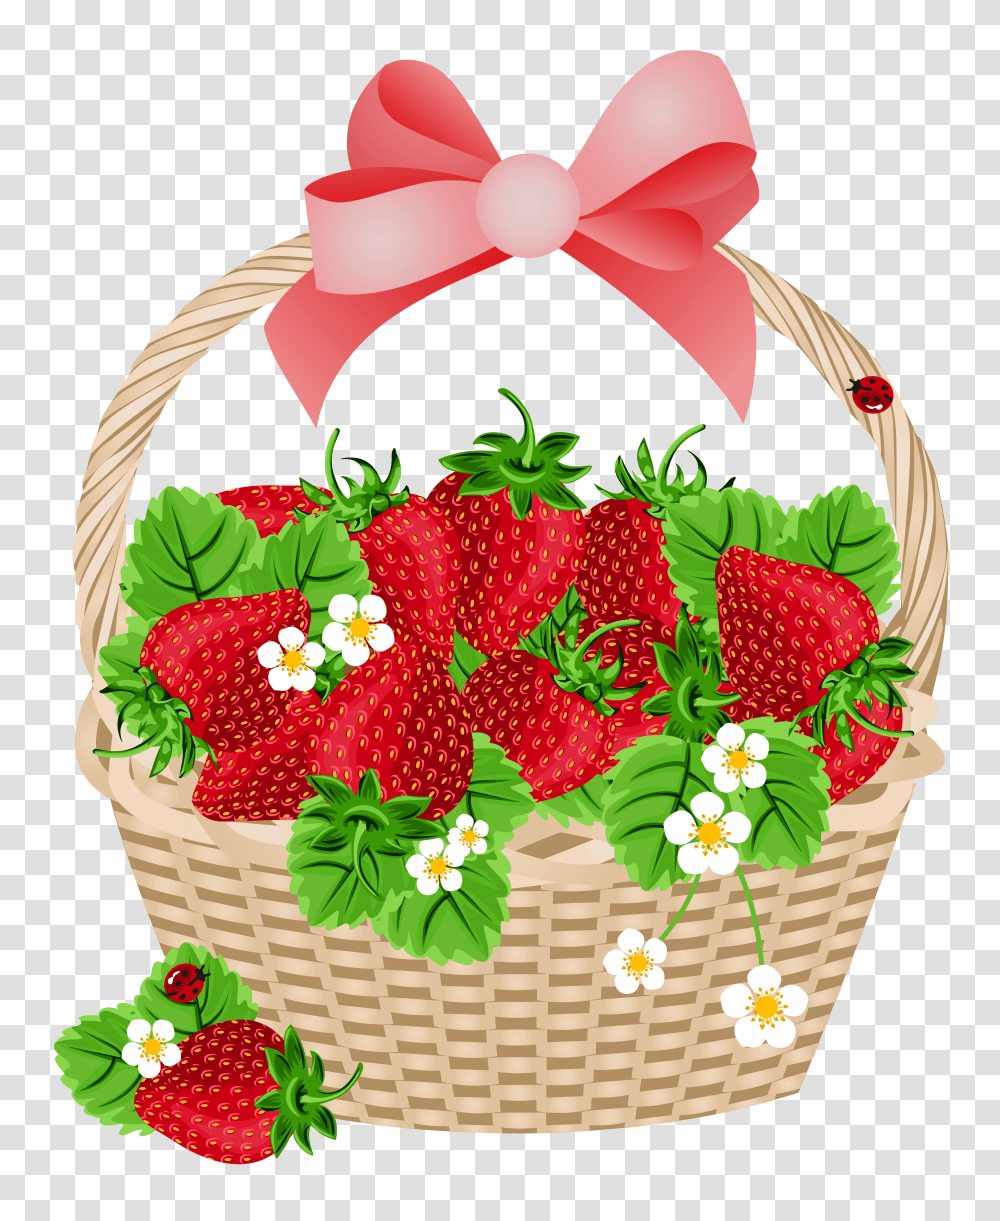 Basket With Strawberries Gallery, Shopping Basket, Birthday Cake, Dessert, Food Transparent Png